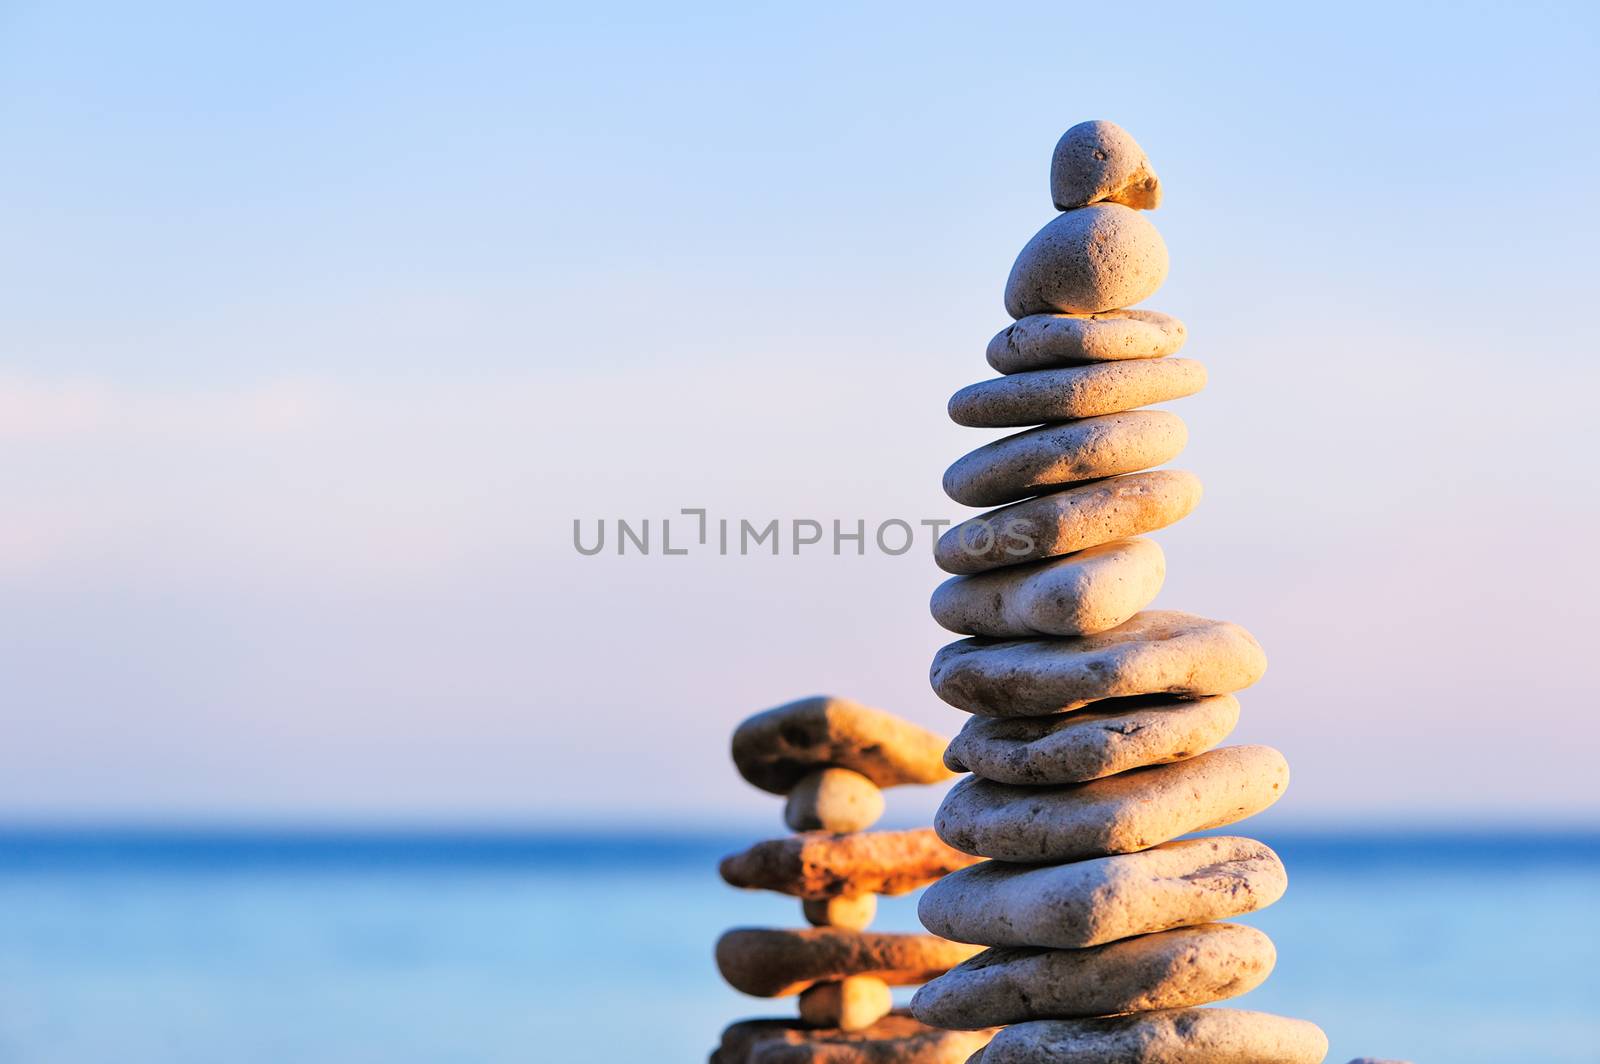 Balancing of stones each other on the seashore